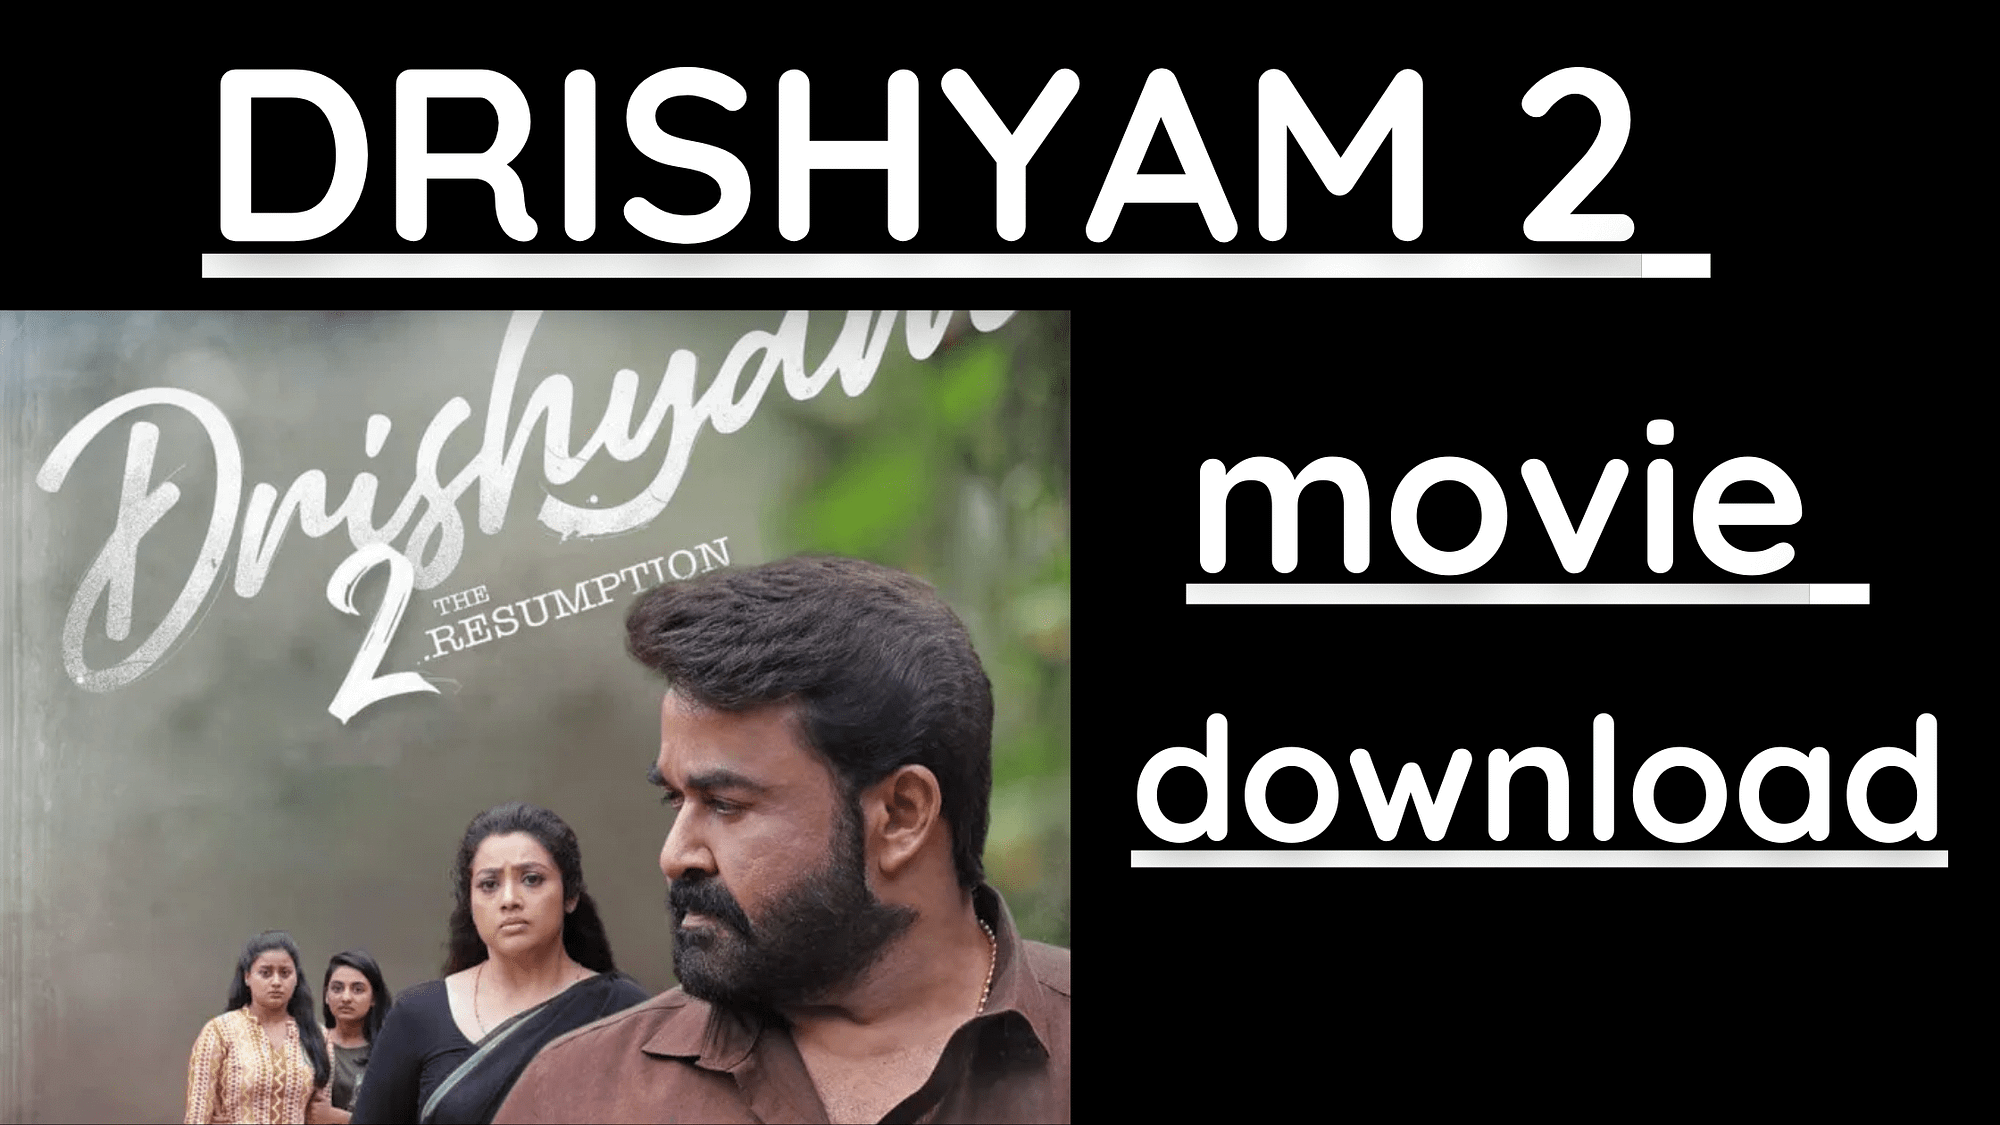 You are currently viewing Drishyam 2 movie download